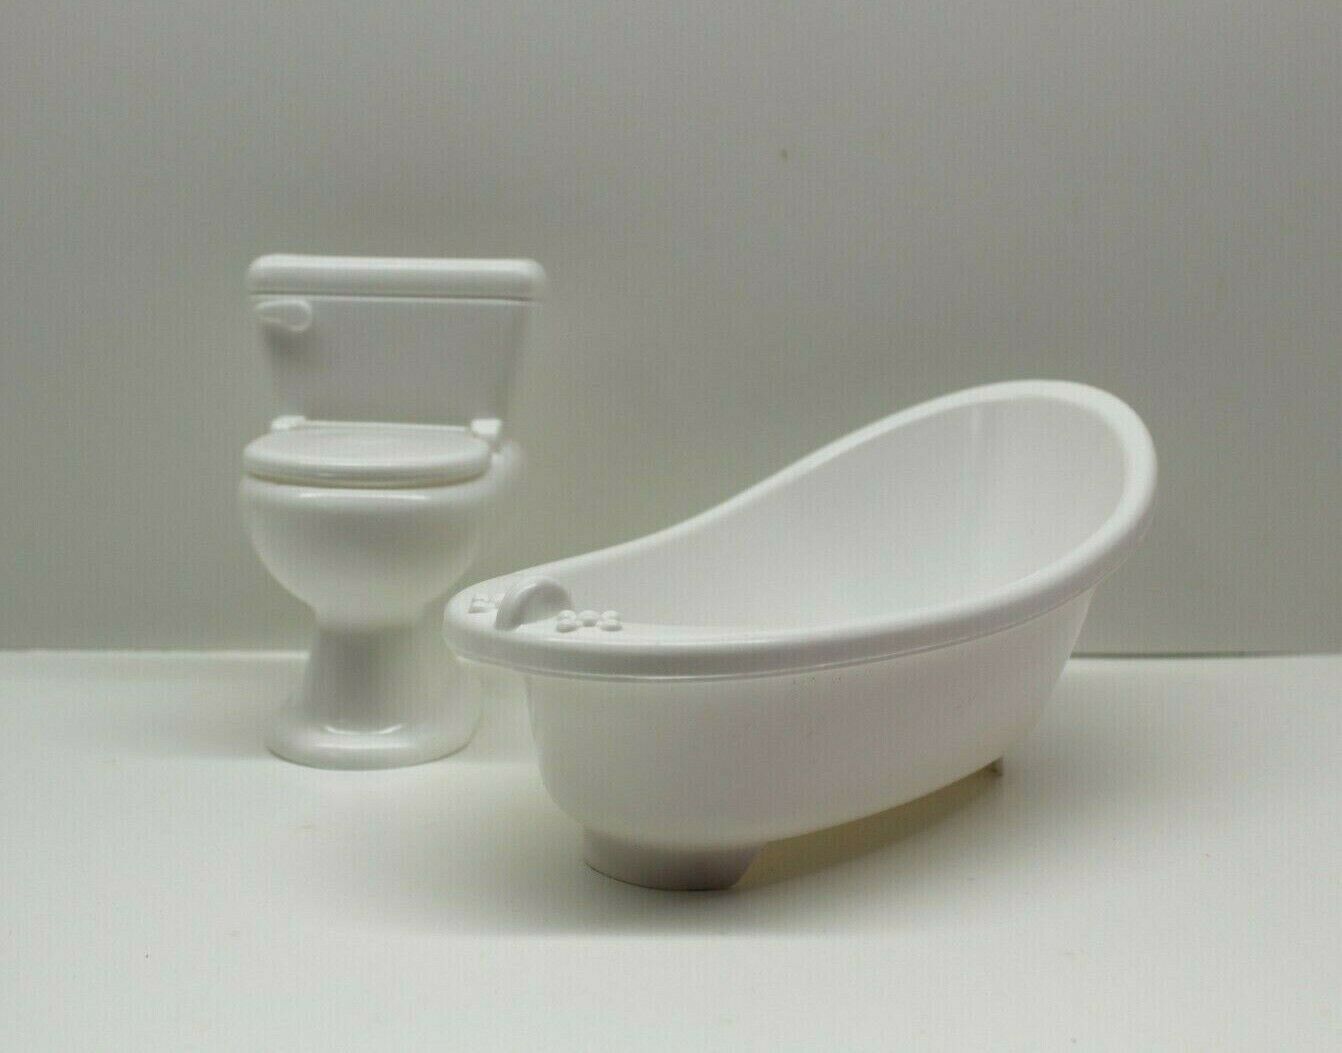 Doll Furniture Bathroom Set White Tub Toilet For 11 inch to 12 Inch Dolls Greenbrier Does Not Apply